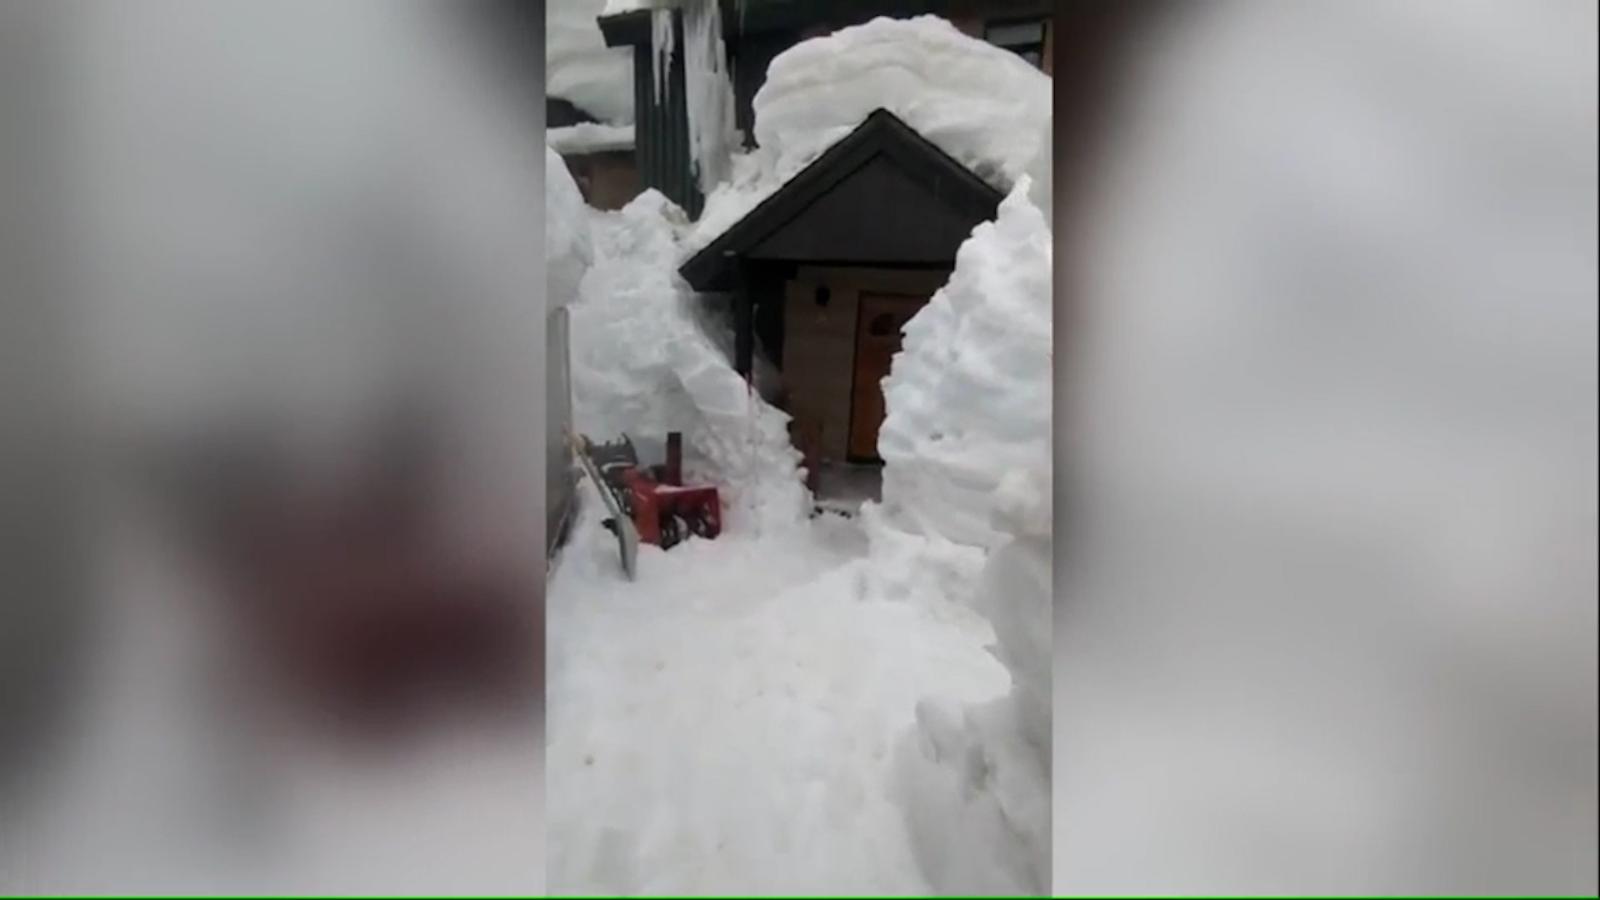 Heavy snowfall in California: Resident walks through snow tunnel to get home